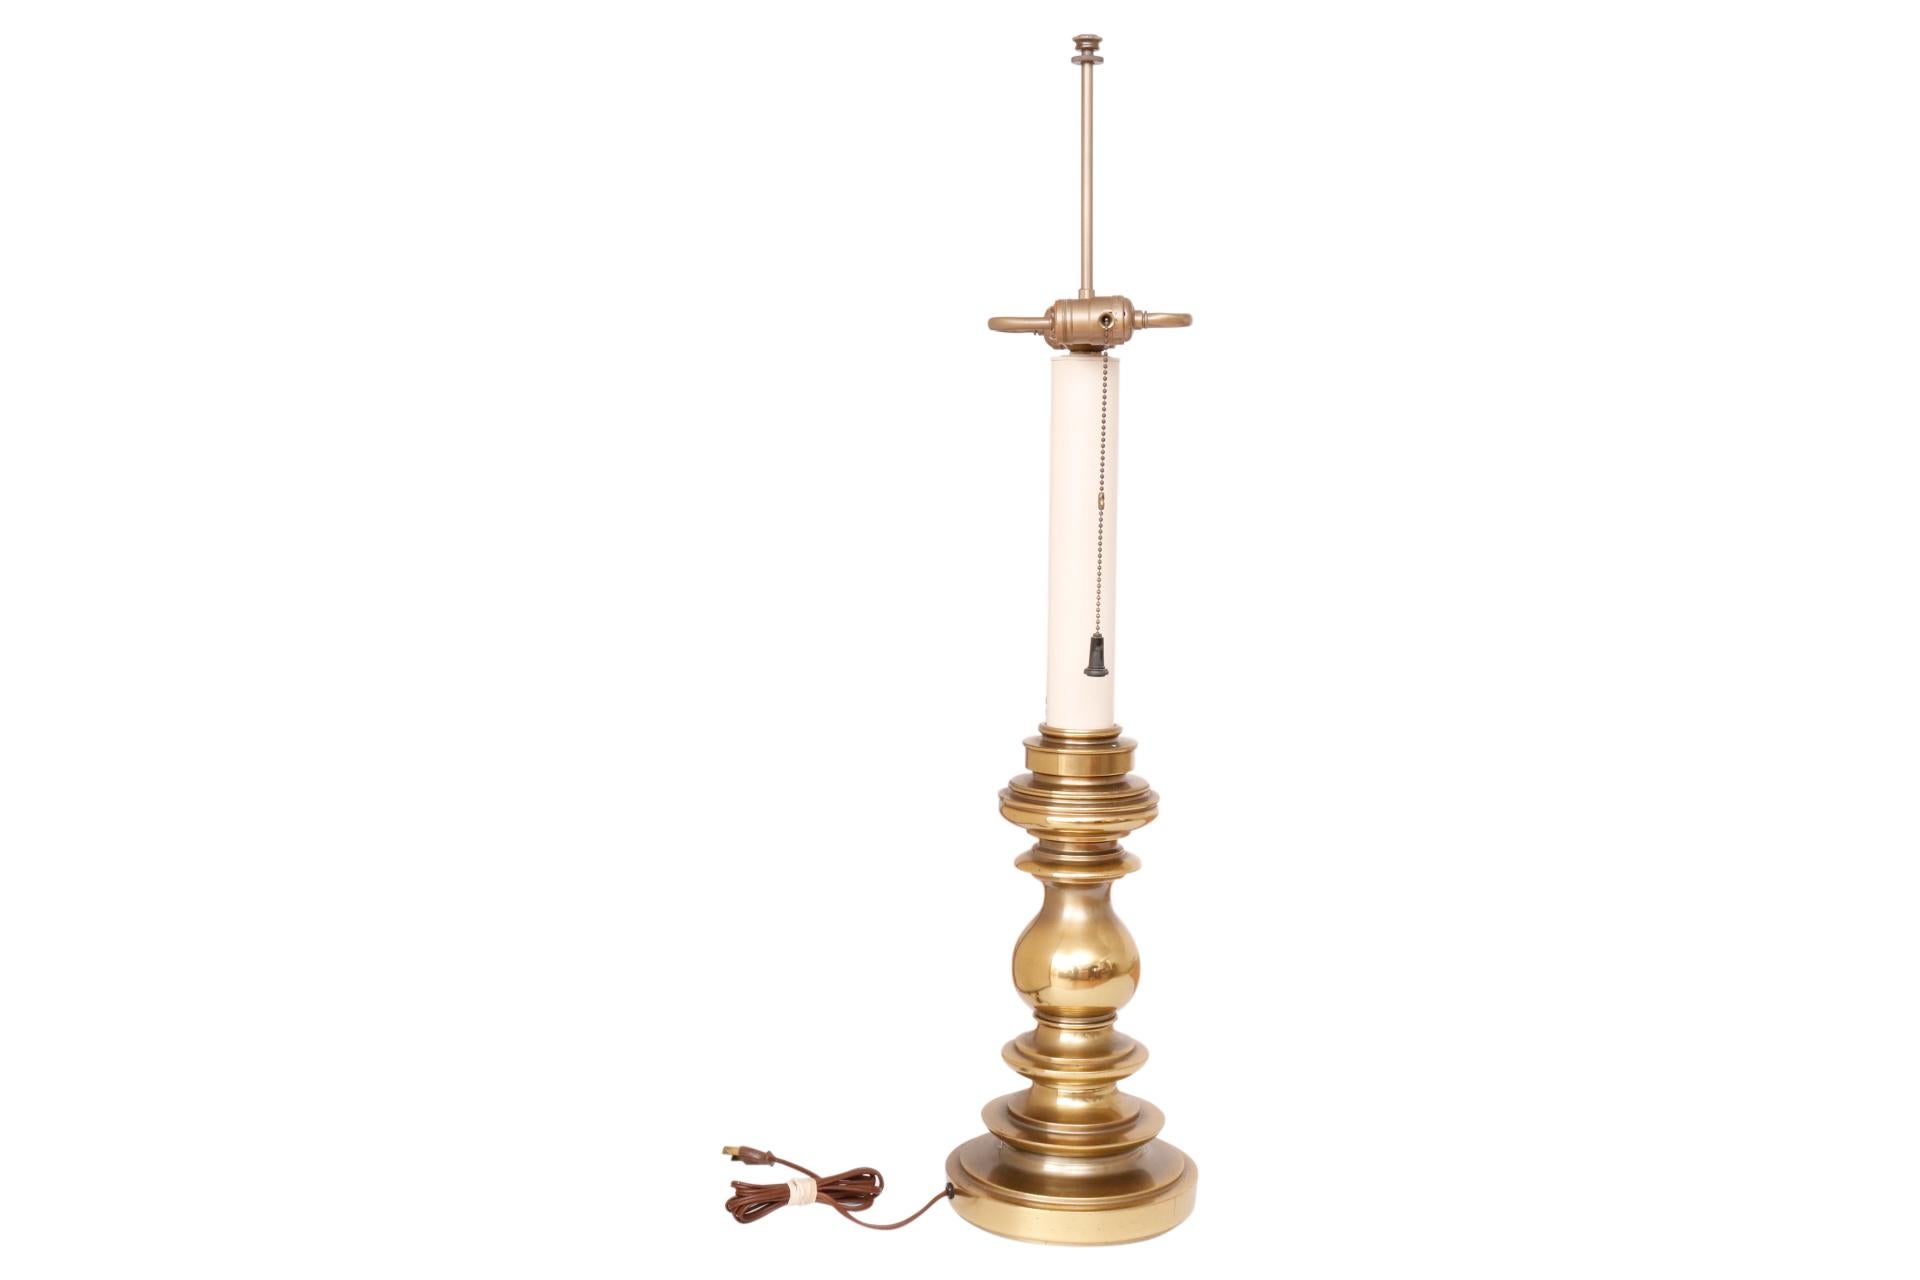 A traditional brass table lamp made by Stiffel. The central column is highly turned brass with a thick round beveled base. Above is a sleek cream column topped with opposing sockets. To support the shade is a slender brass post with a small cap